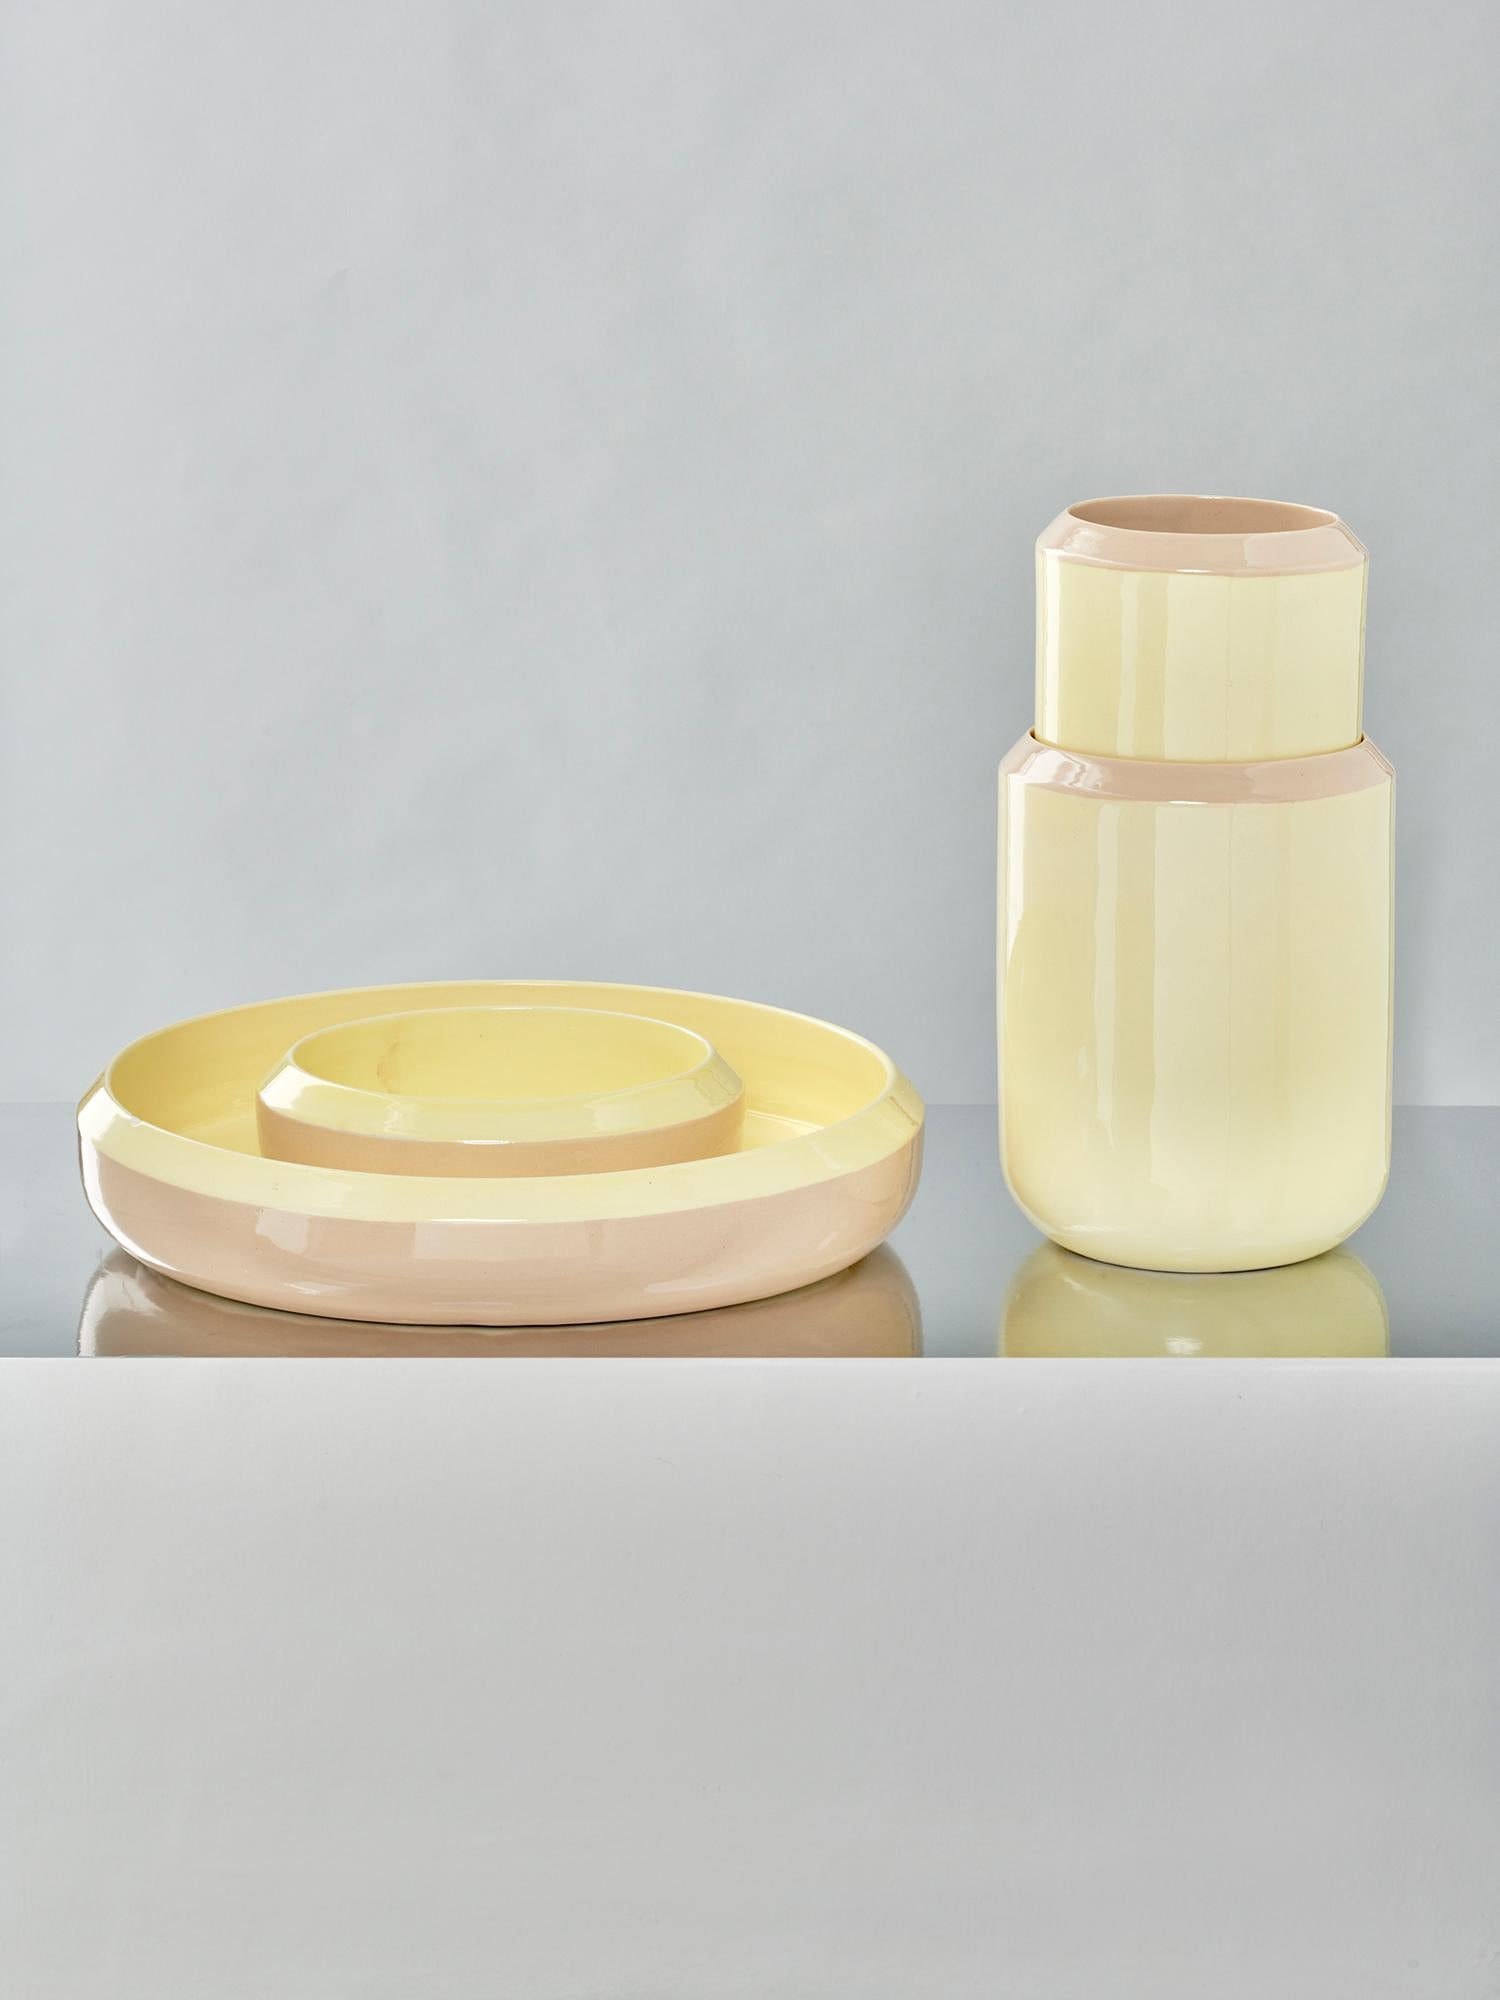 In INTO EACH OTHER ceramics by Maddalena Casadei the glossy interconnection between two colored surfaces refers to the value of new cross-cultural exchanges.

Details:
Color: Yellow and beige
Material: 100% Mediterranean white clay
Technique: